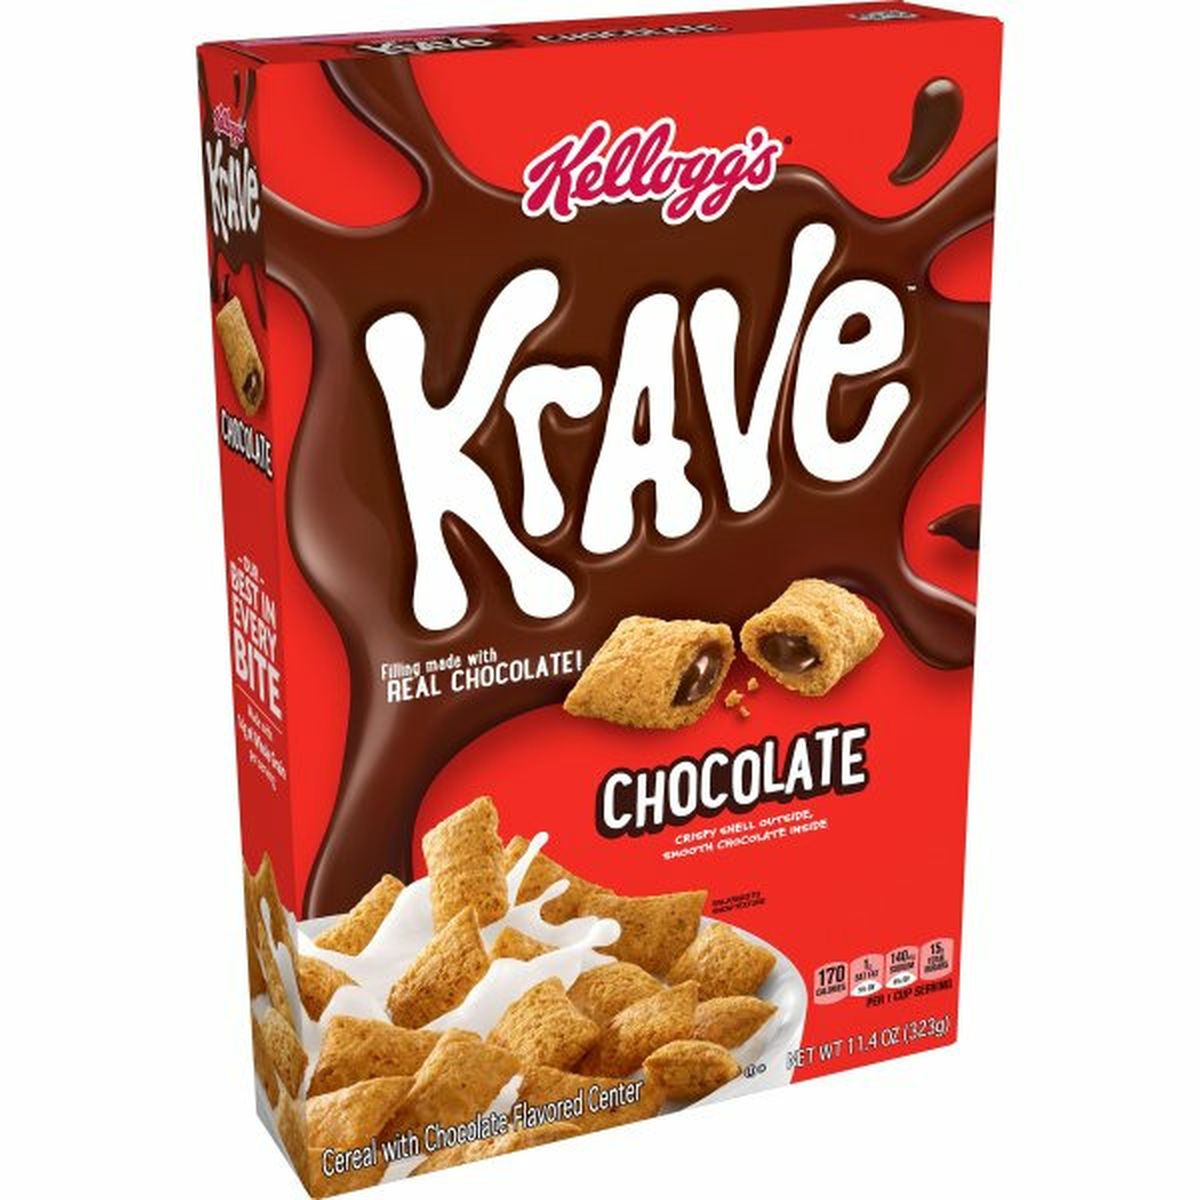 Calories in Kellogg's Krave Cereal Kellogg's Krave Breakfast Cereal, Chocolate, Filling Made with Real Chocolate, 11.4oz